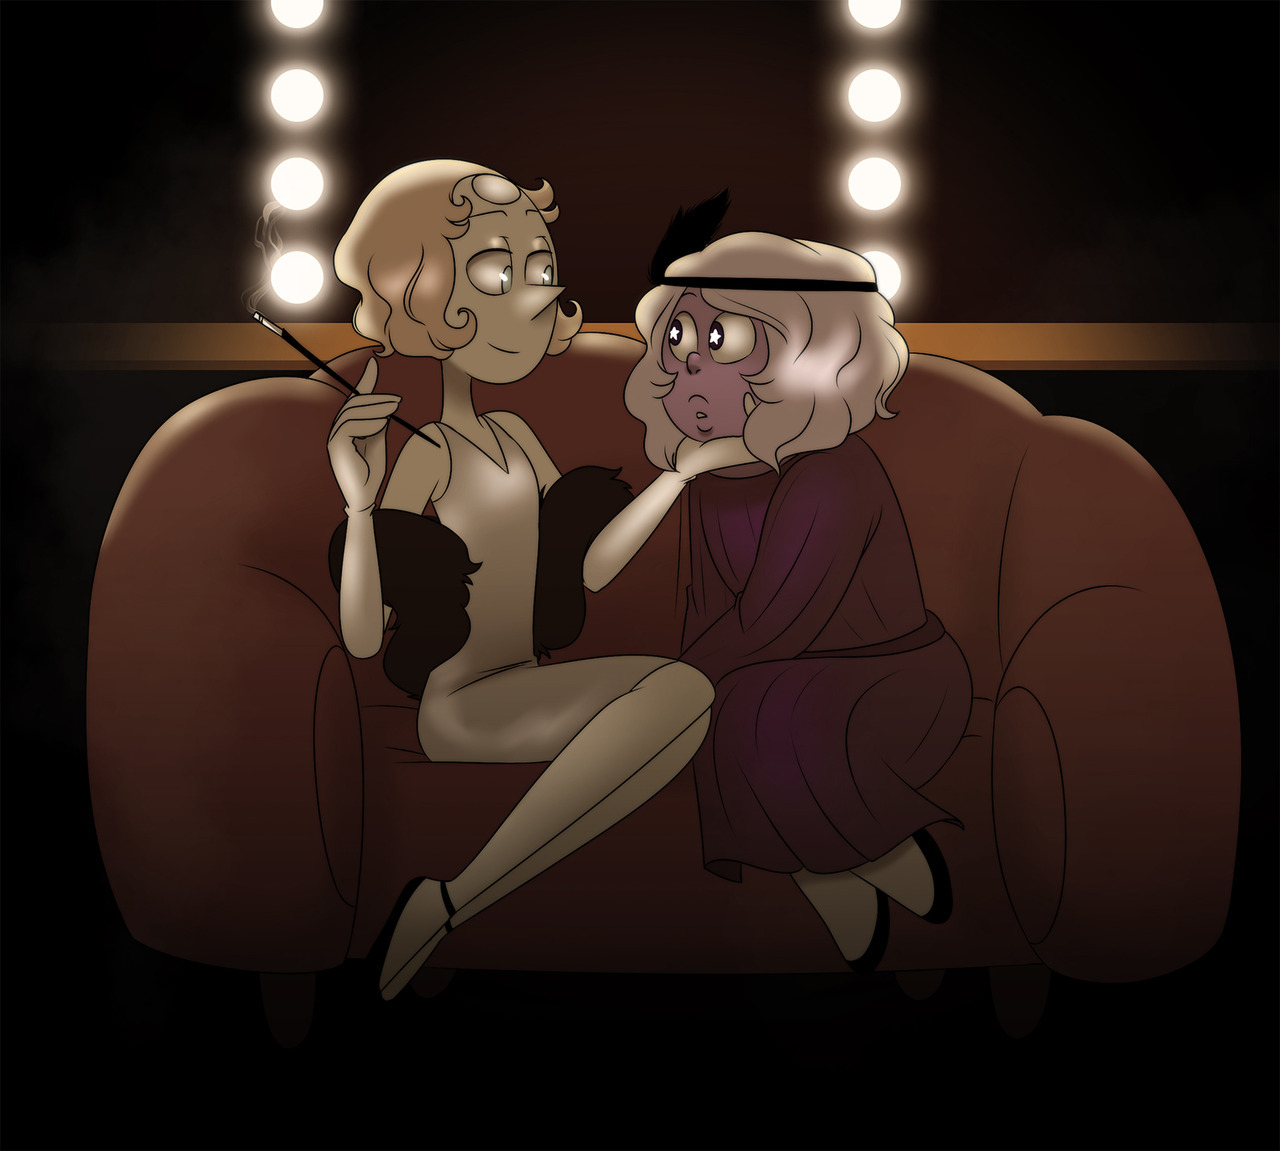 Pearlmethyst week prompt 2: 1920′s Pearl is some kind of jazz/night club singer and Amethyst is her fan that Pearl invites backstage. For smoochies. @annadesu @fuckyeahpearlmethyst